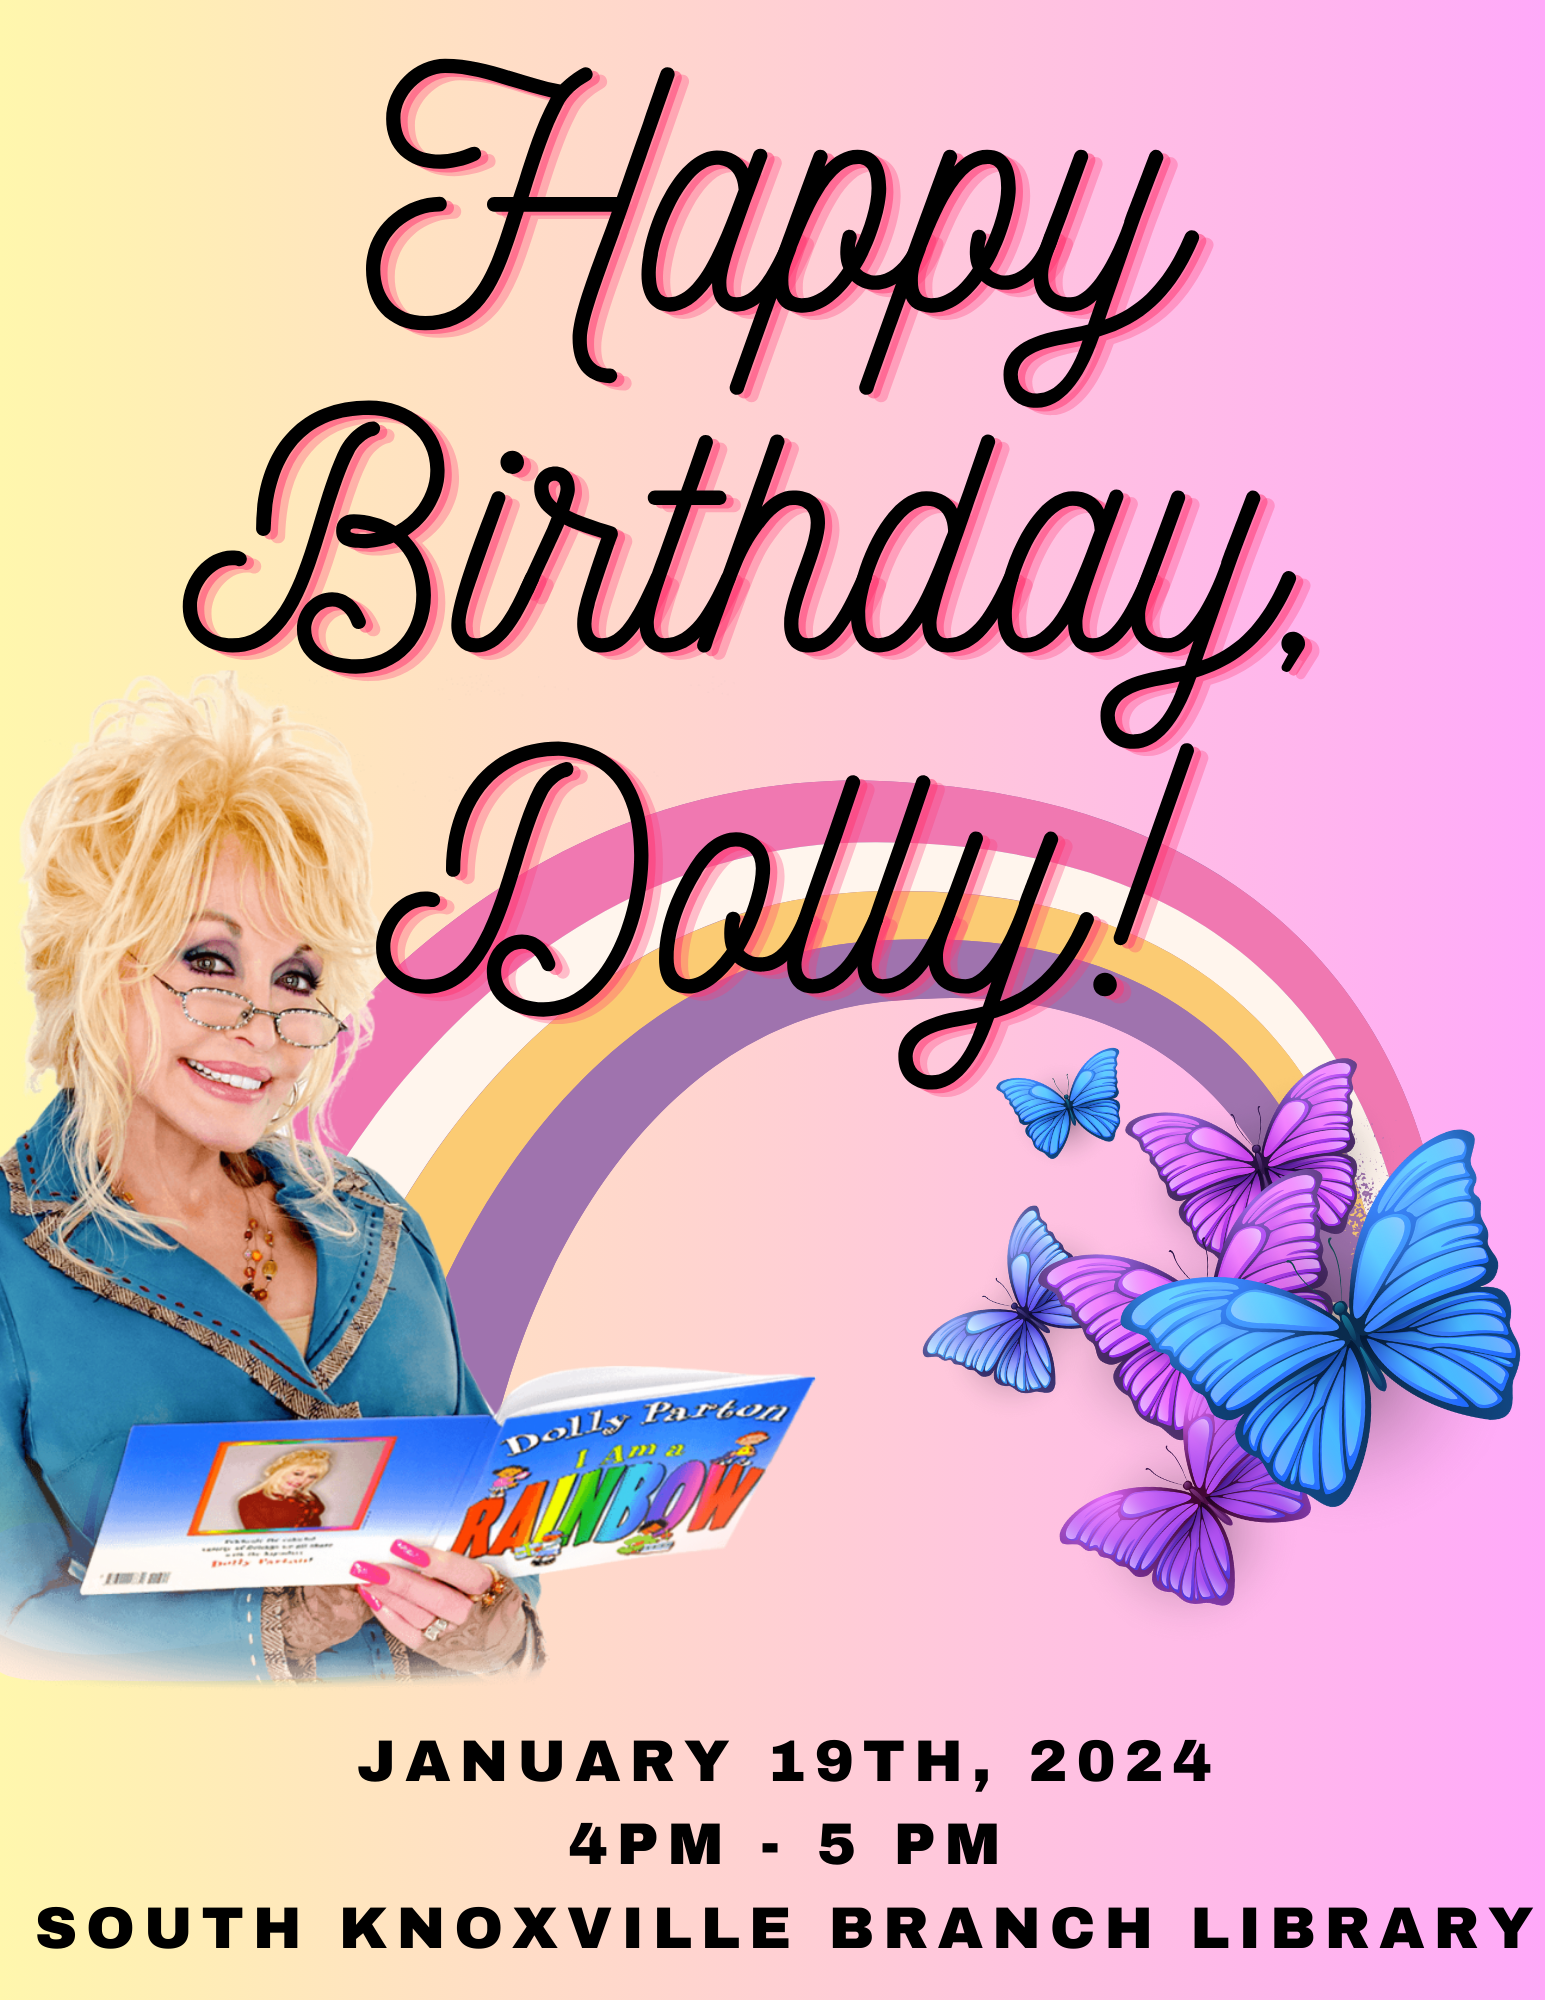 Happy Birthday, Dolly event flyer with Dolly Parton, a rainbow, butterflies, and location of event